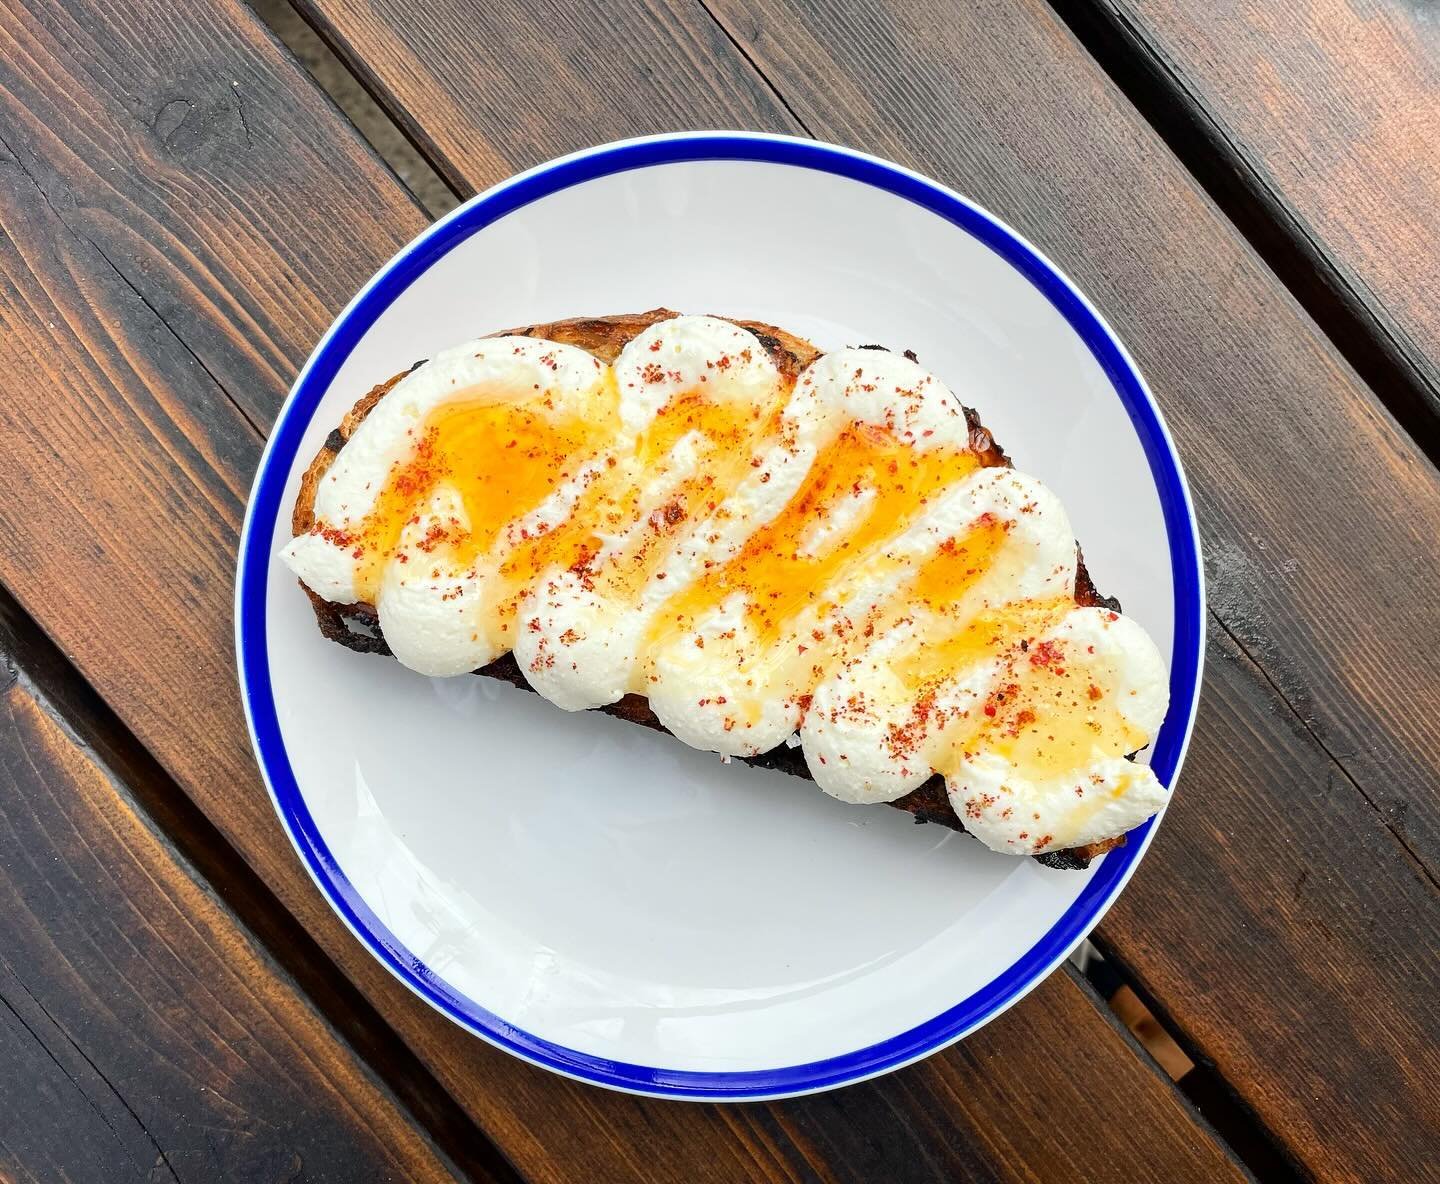 Who remembers this classic? 😊

𝕽𝖎𝖈𝖔𝖙𝖙𝖆 𝕿𝖔𝖆𝖘𝖙 is back on the menu! ✨

House made whipped ricotta, honey, chili oil &amp; pink pepper on grilled sourdough.

We owe you one @meatwalllet 🙏